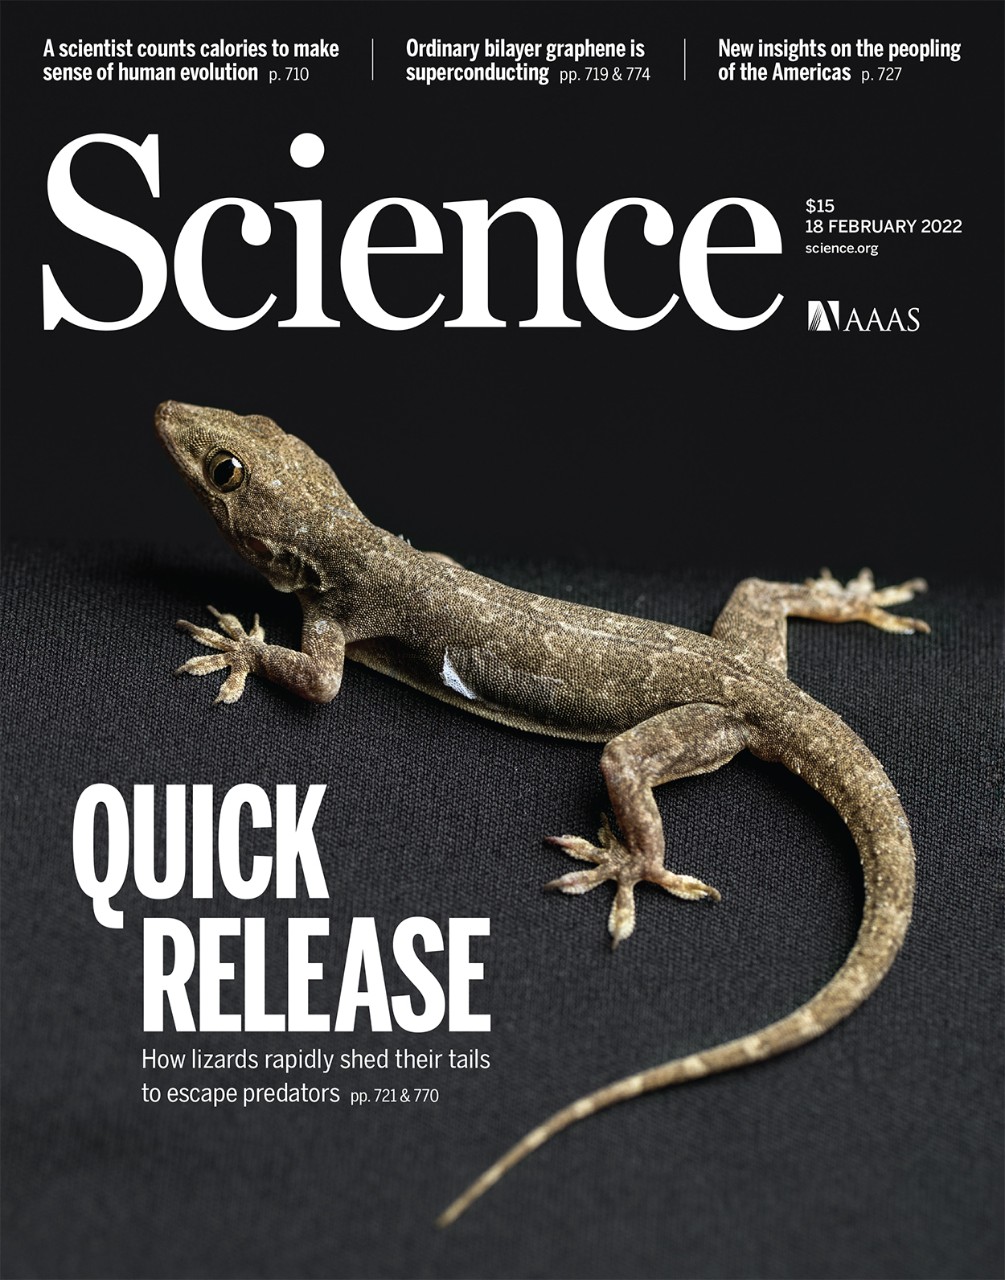 Science magazine article - Rafael Song